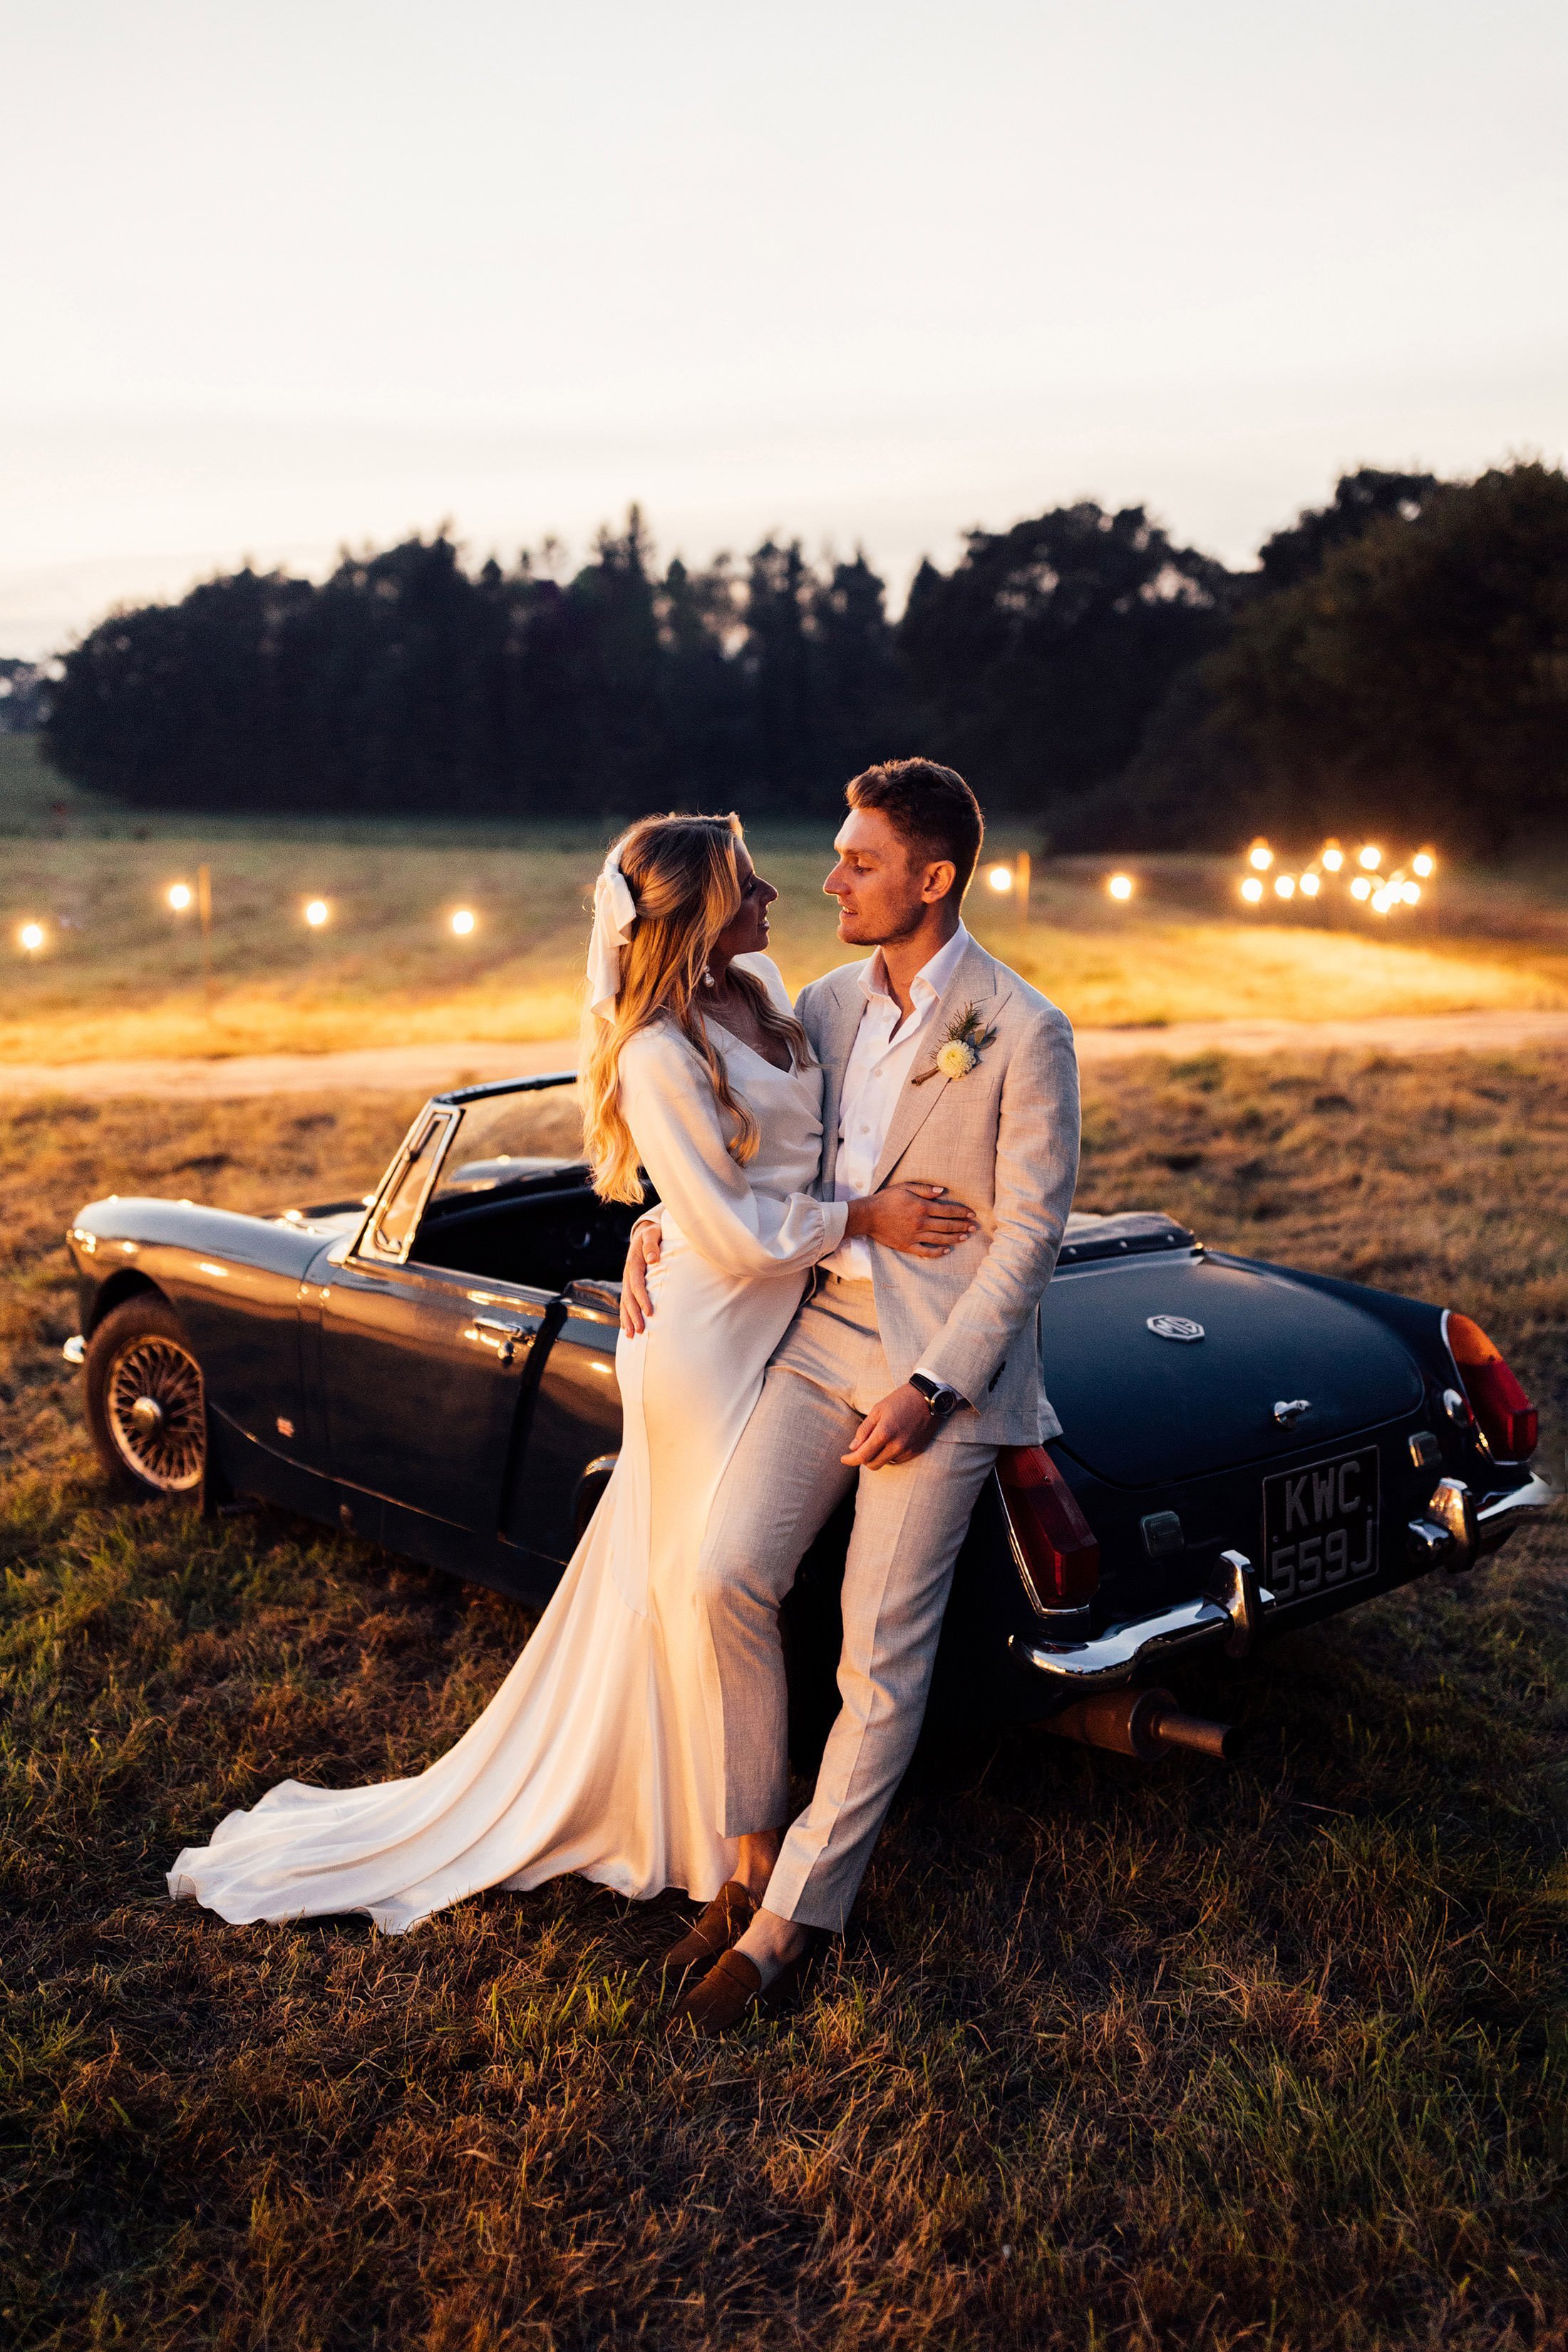 couples portrait at dusk in front of vintage MG car